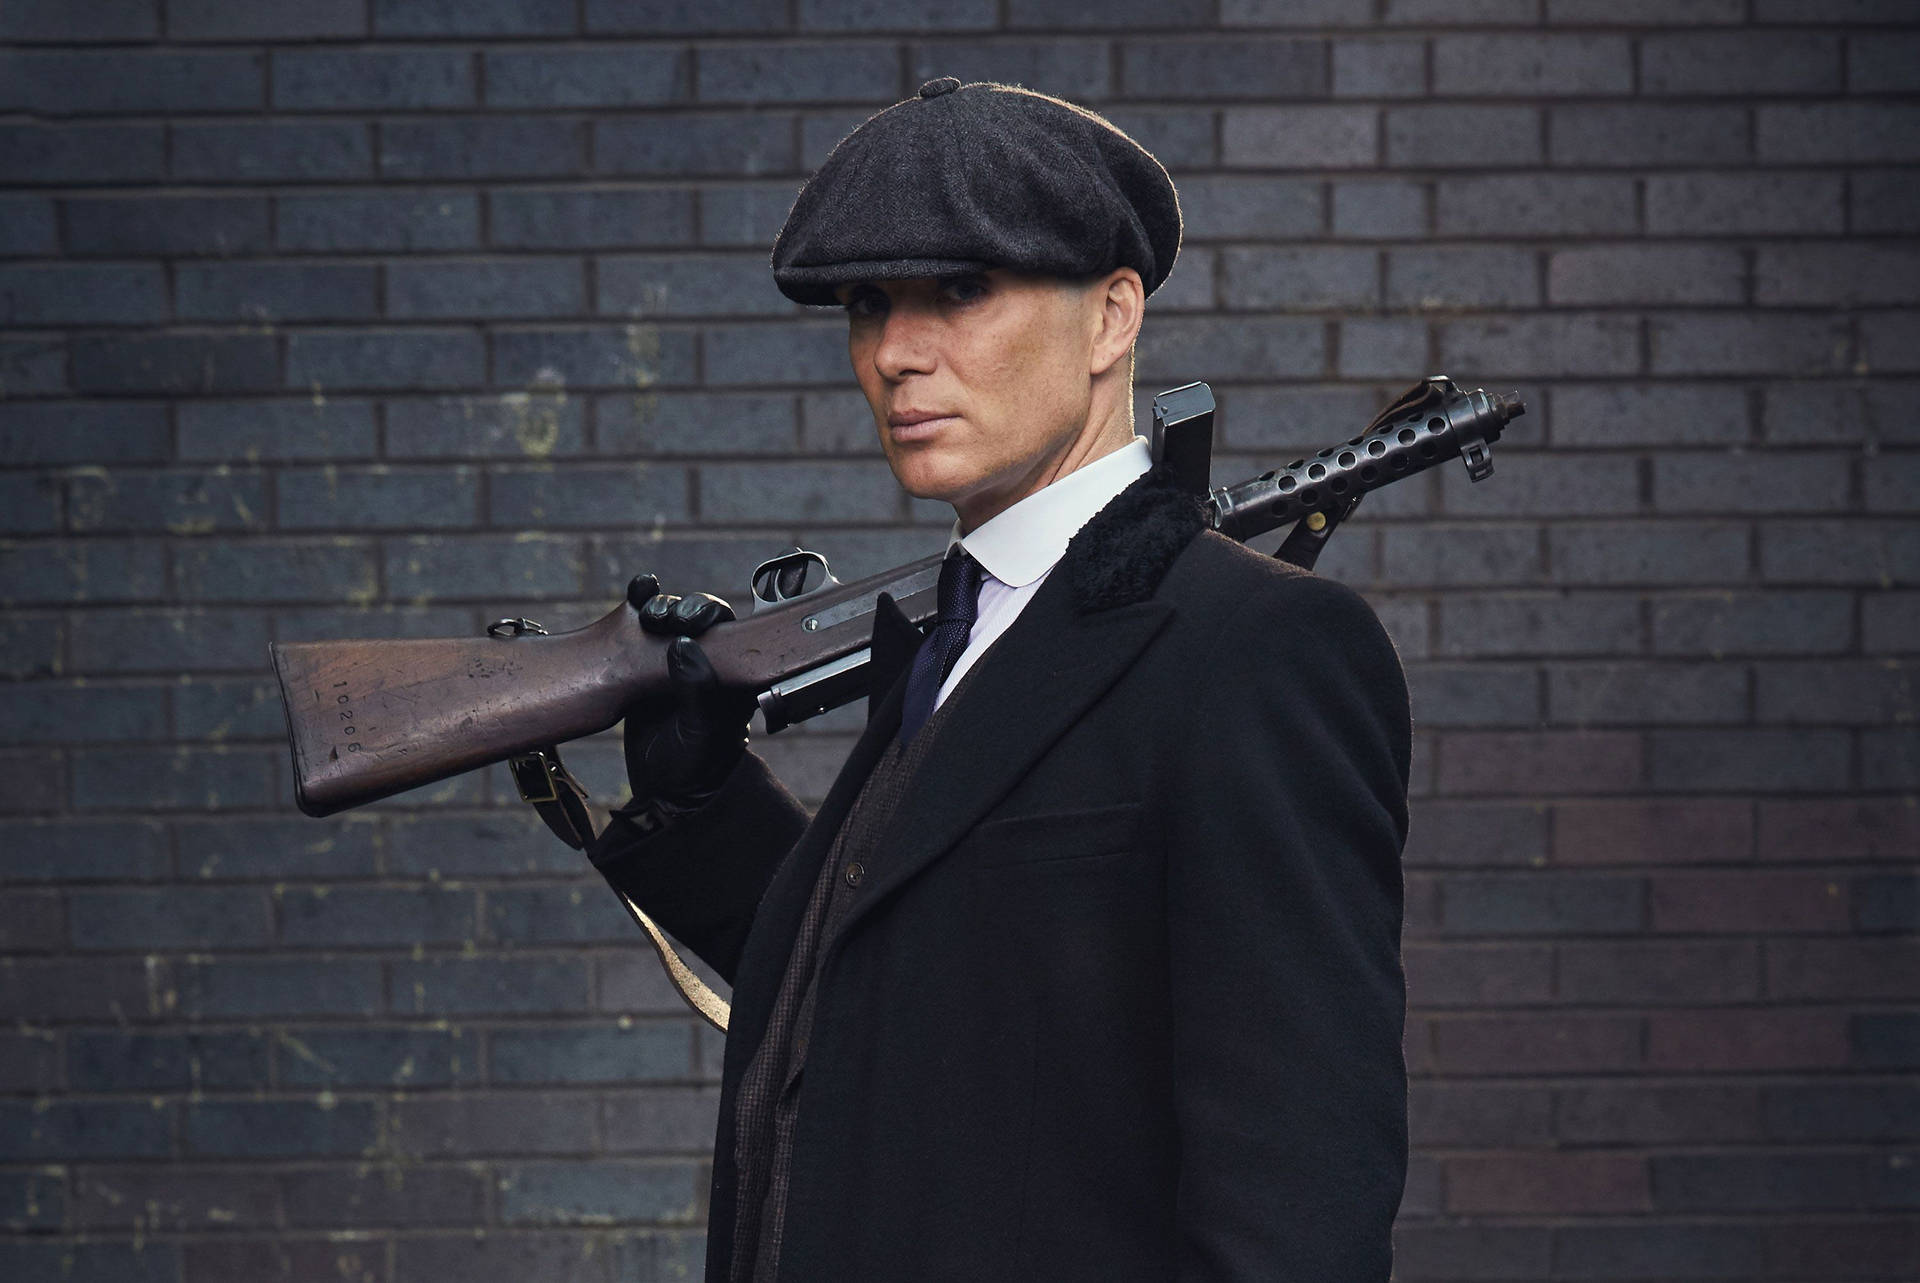 Cillian Murphy With Rifle Background